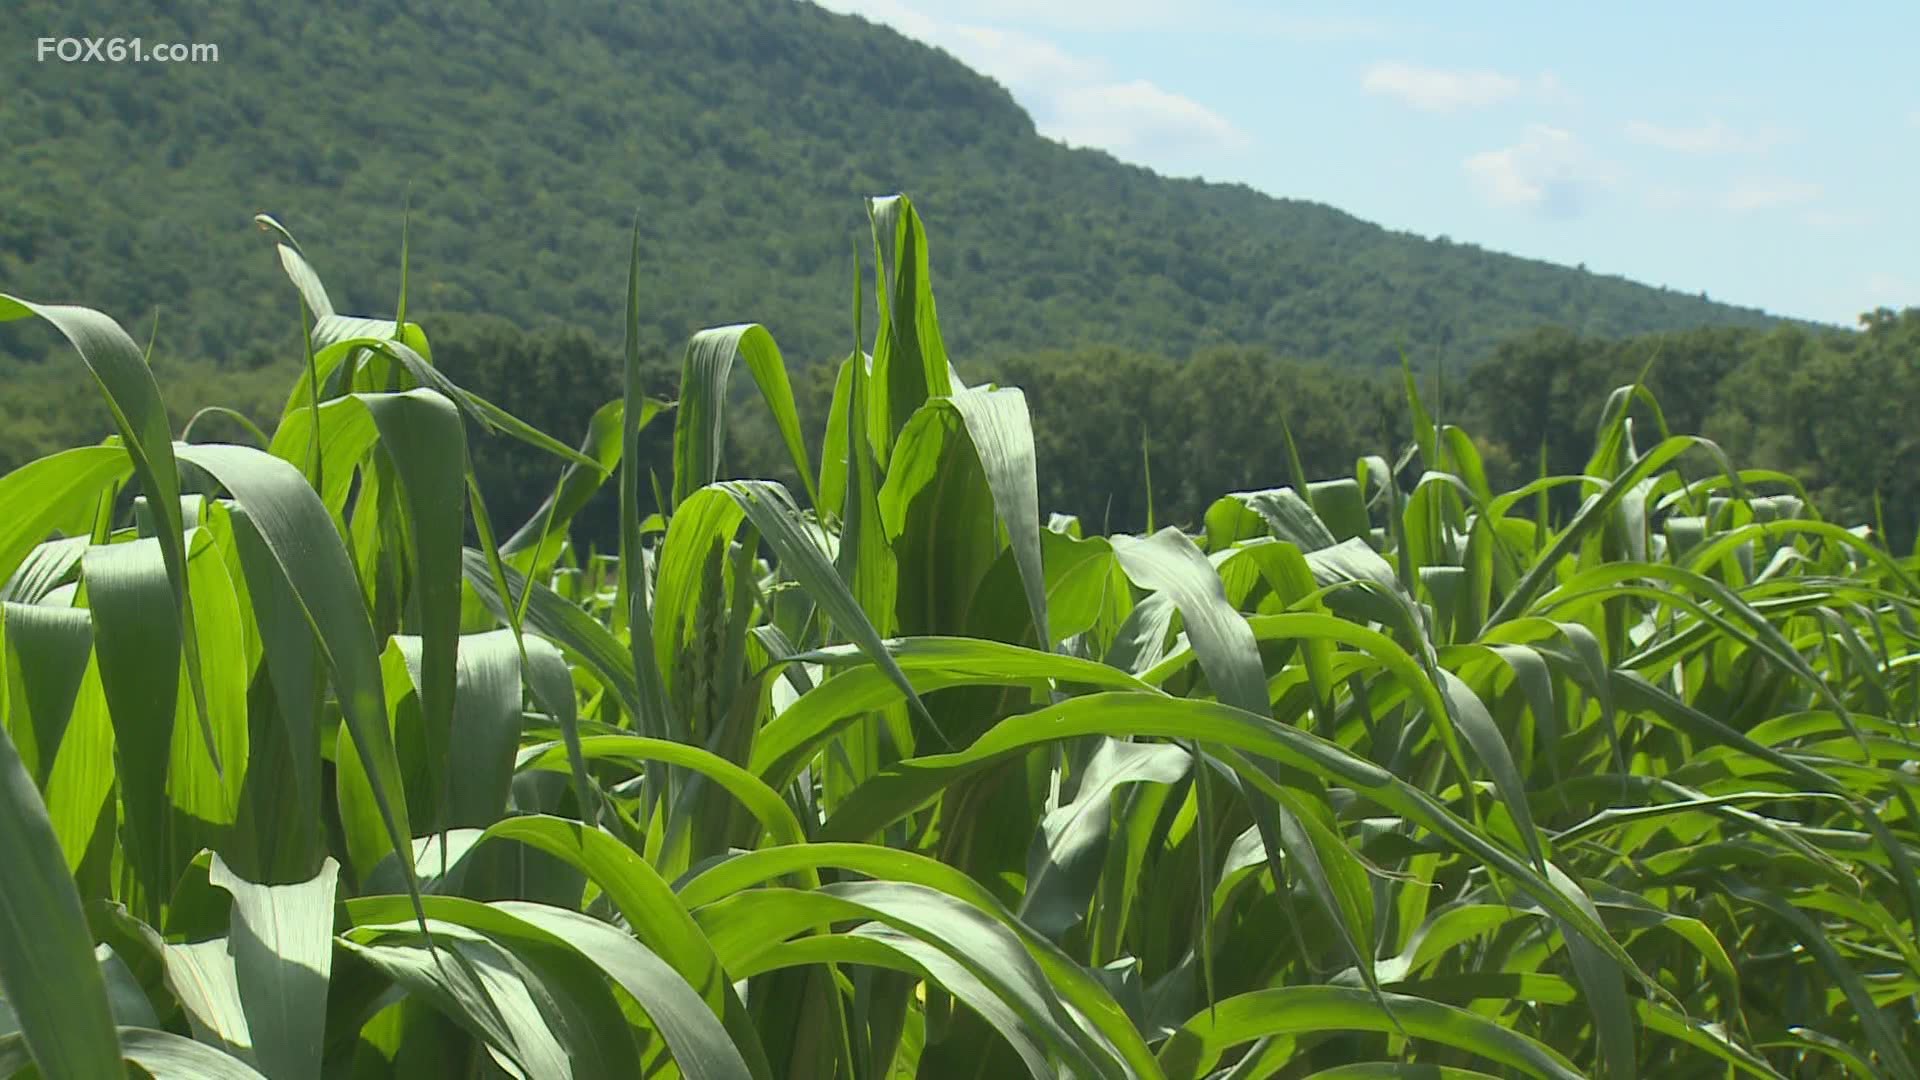 Wade’s Farm relies solely on the skies to water their crops, they have no irrigation systems in their corn fields.